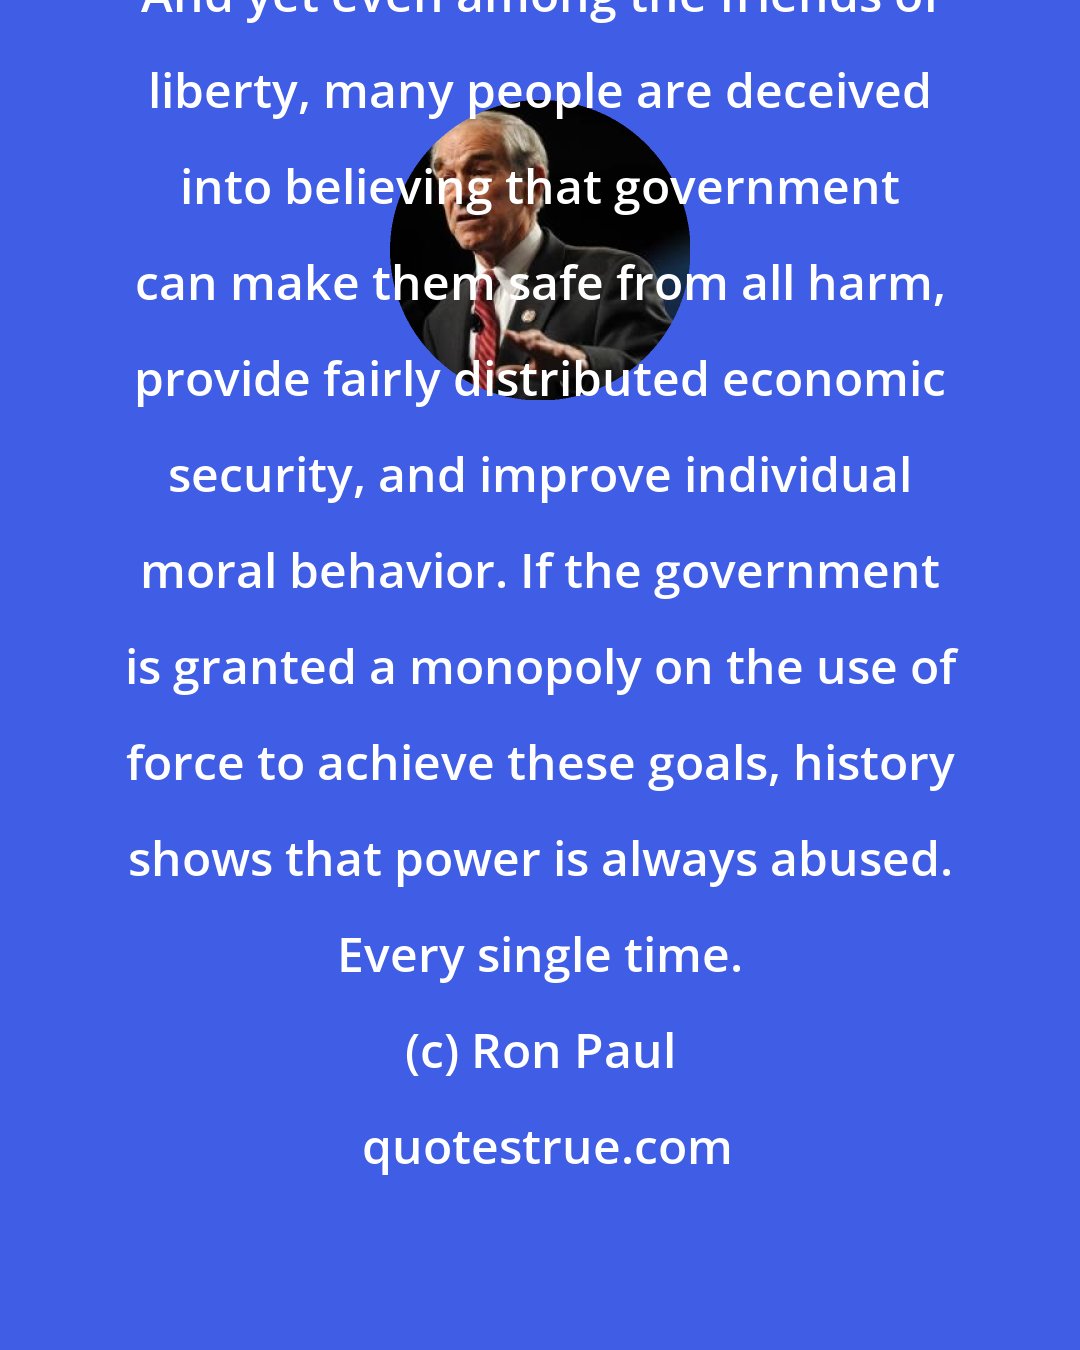 Ron Paul: And yet even among the friends of liberty, many people are deceived into believing that government can make them safe from all harm, provide fairly distributed economic security, and improve individual moral behavior. If the government is granted a monopoly on the use of force to achieve these goals, history shows that power is always abused. Every single time.